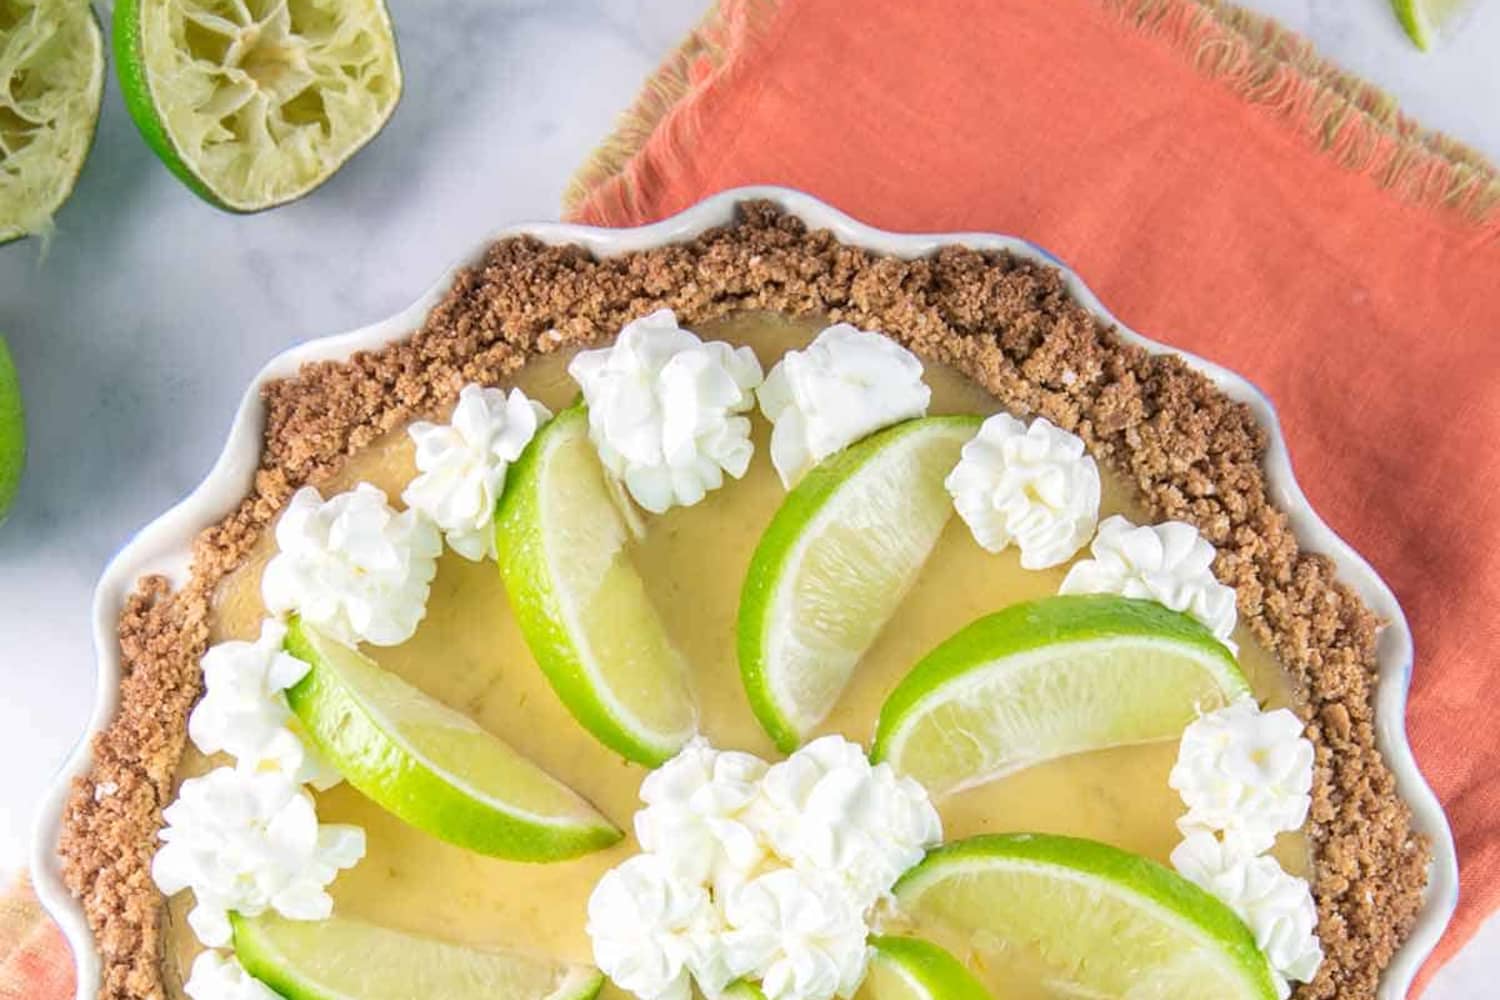 Classic Key Lime Pie Just Got a Sweet Upgrade with This One Fruity Addition